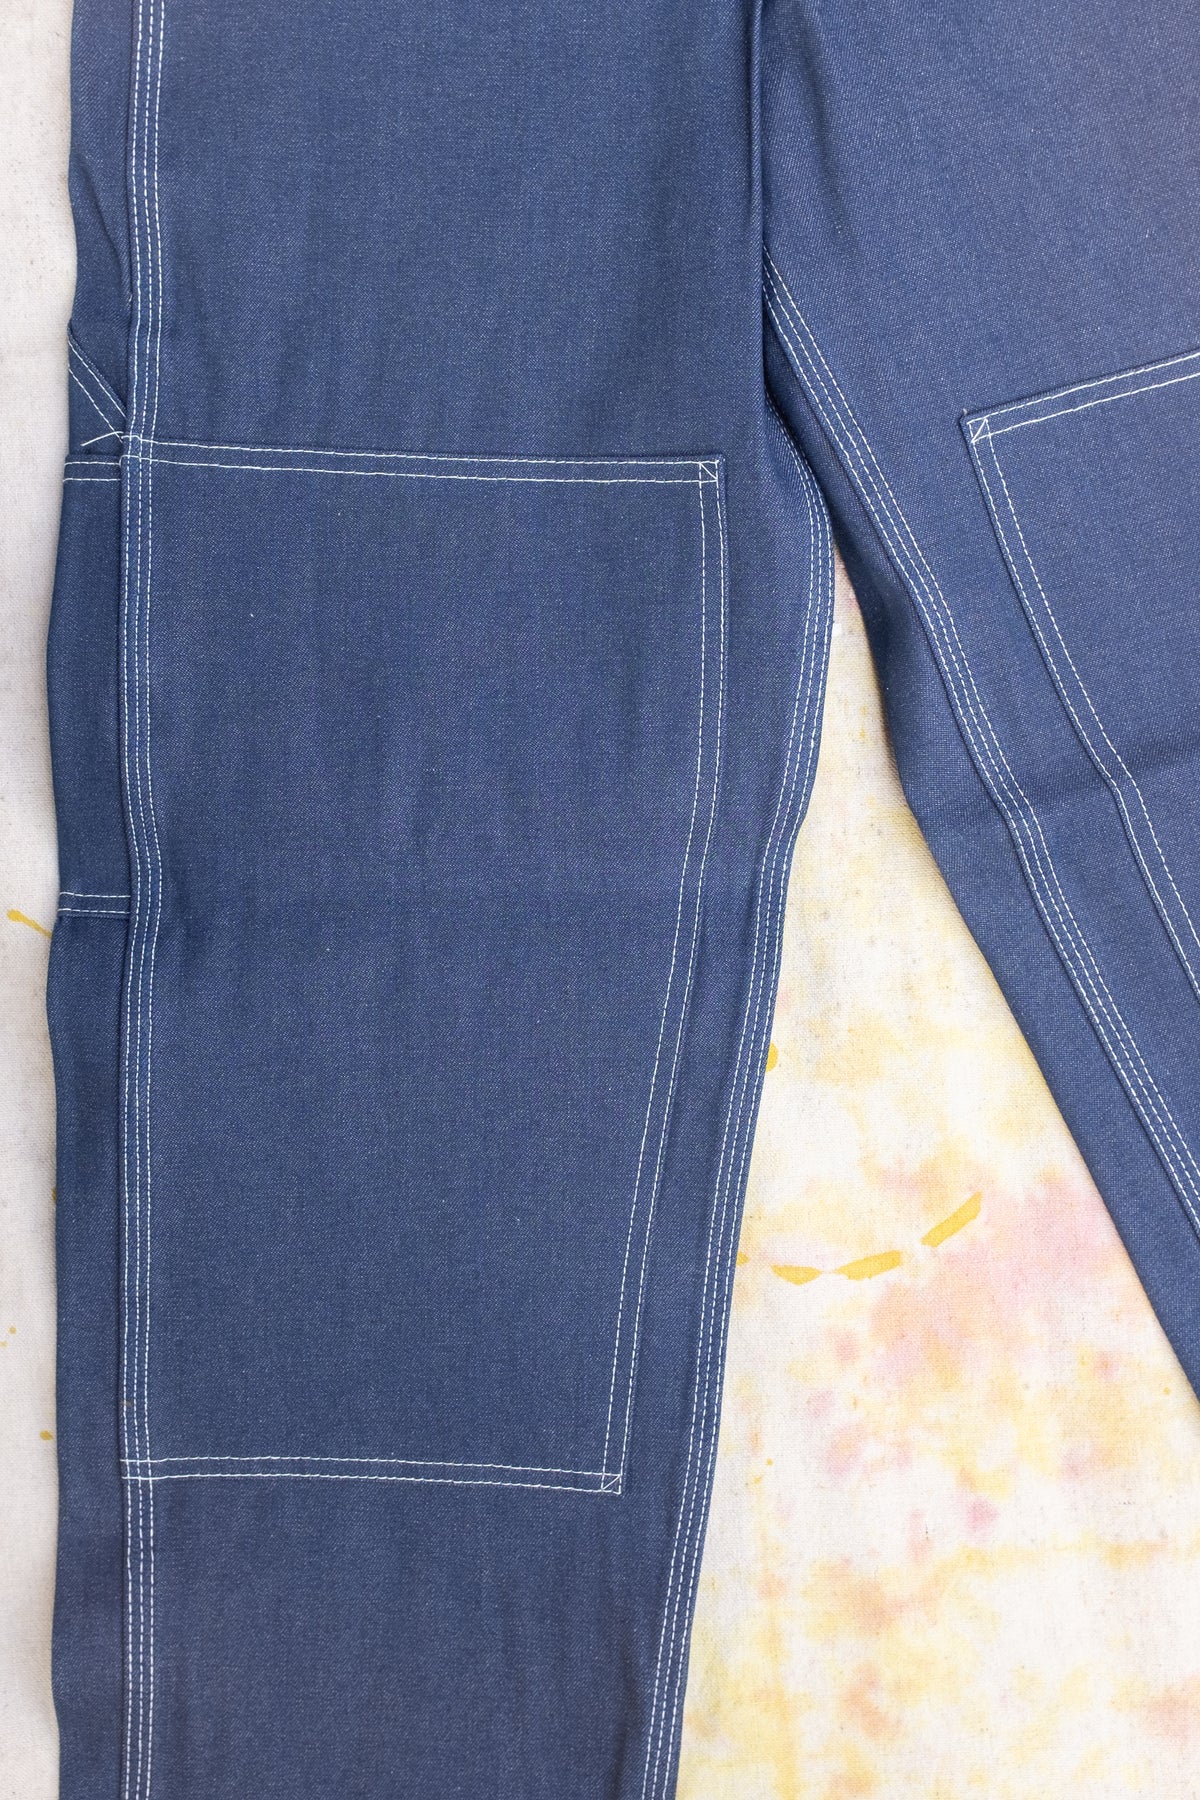 Double Knee Painters Pants - Raw Denim | Clothing and Home Goods in Los ...